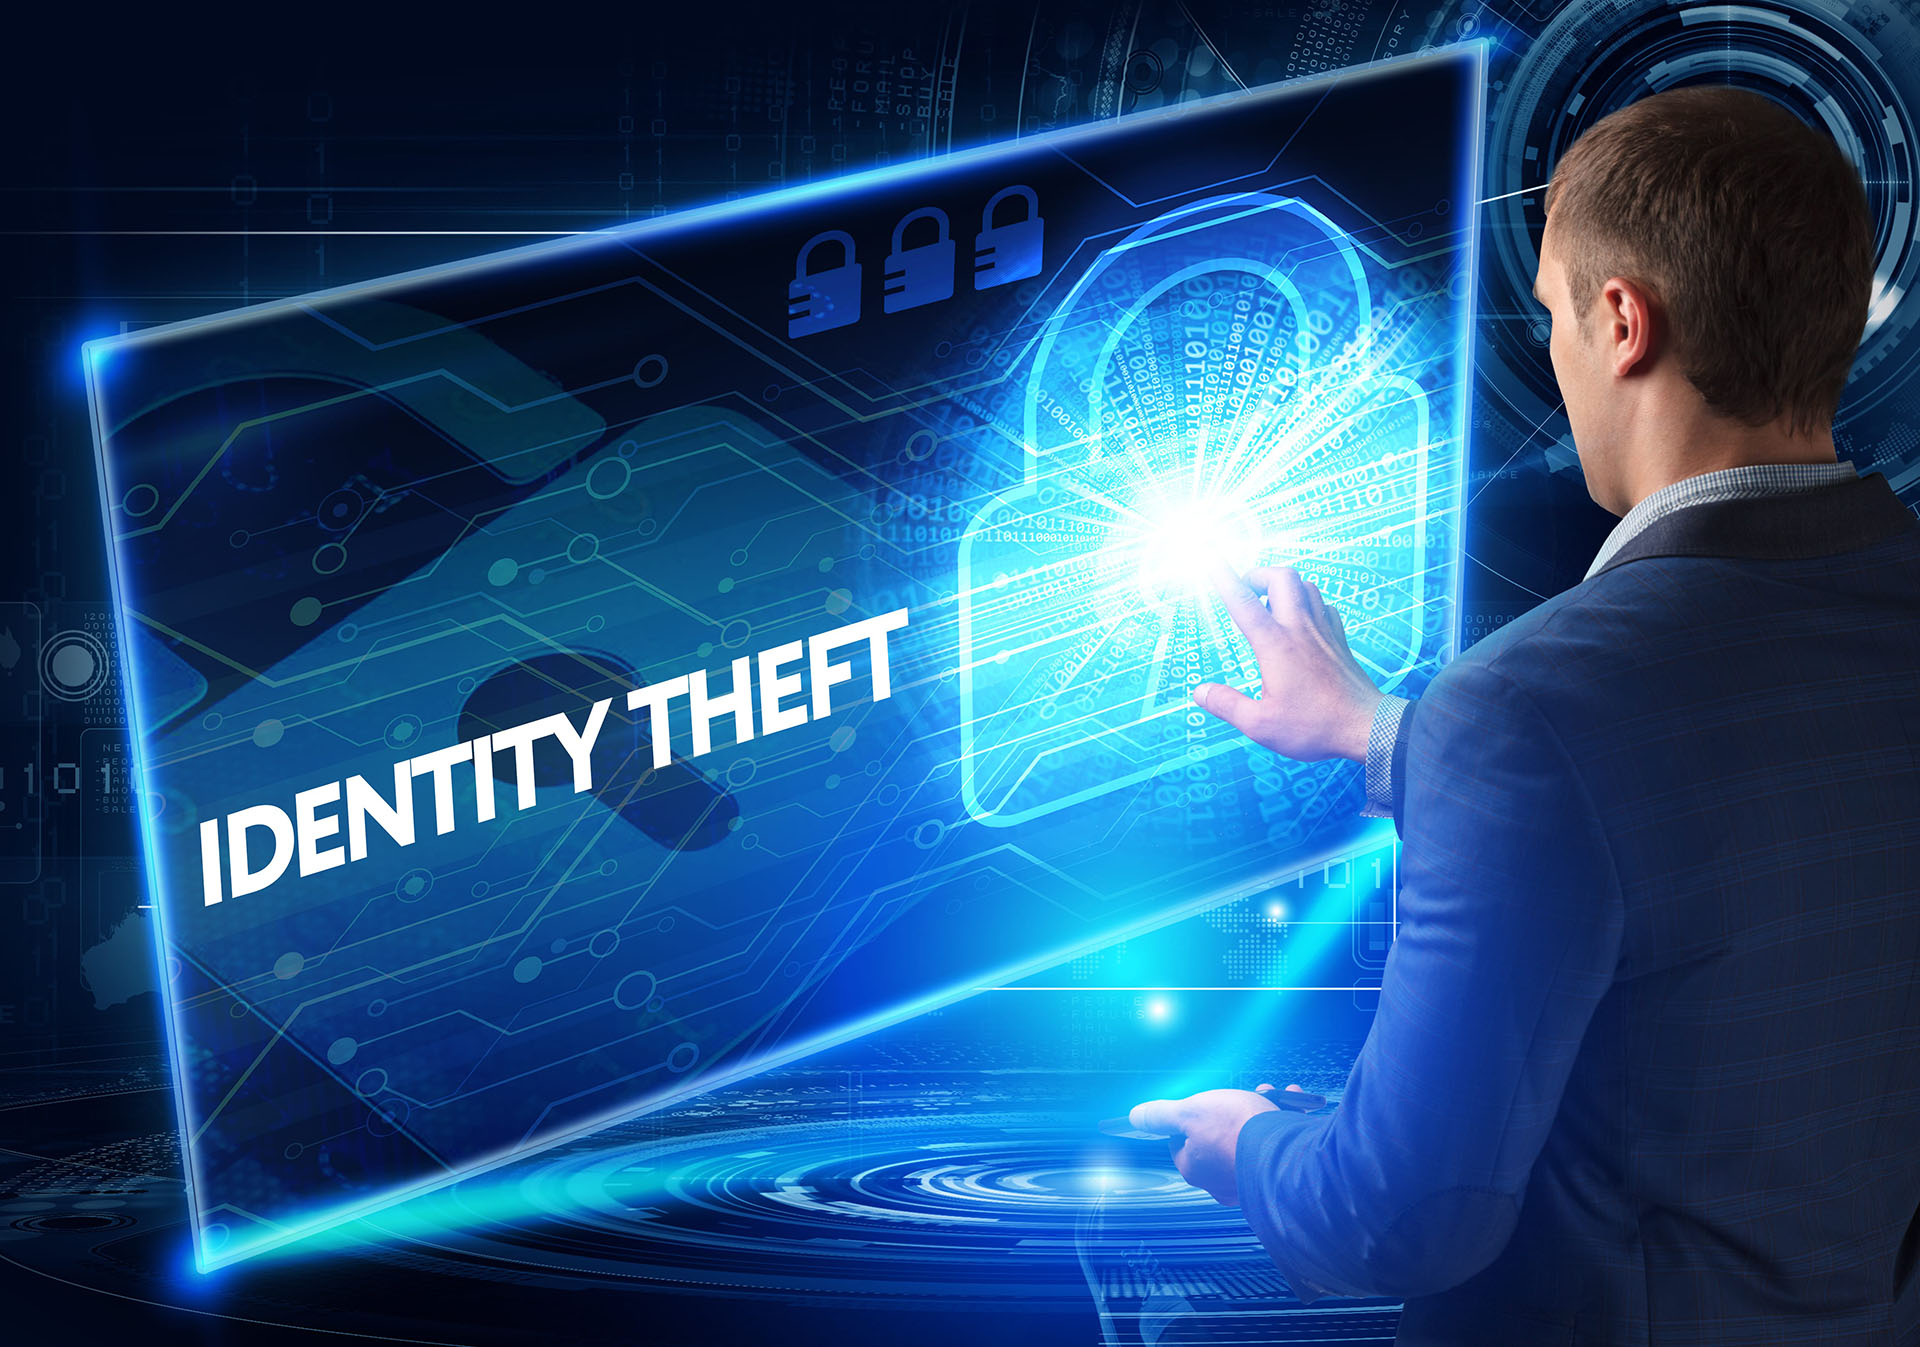 Child Identity Theft: It’s Not Only Adults Affected